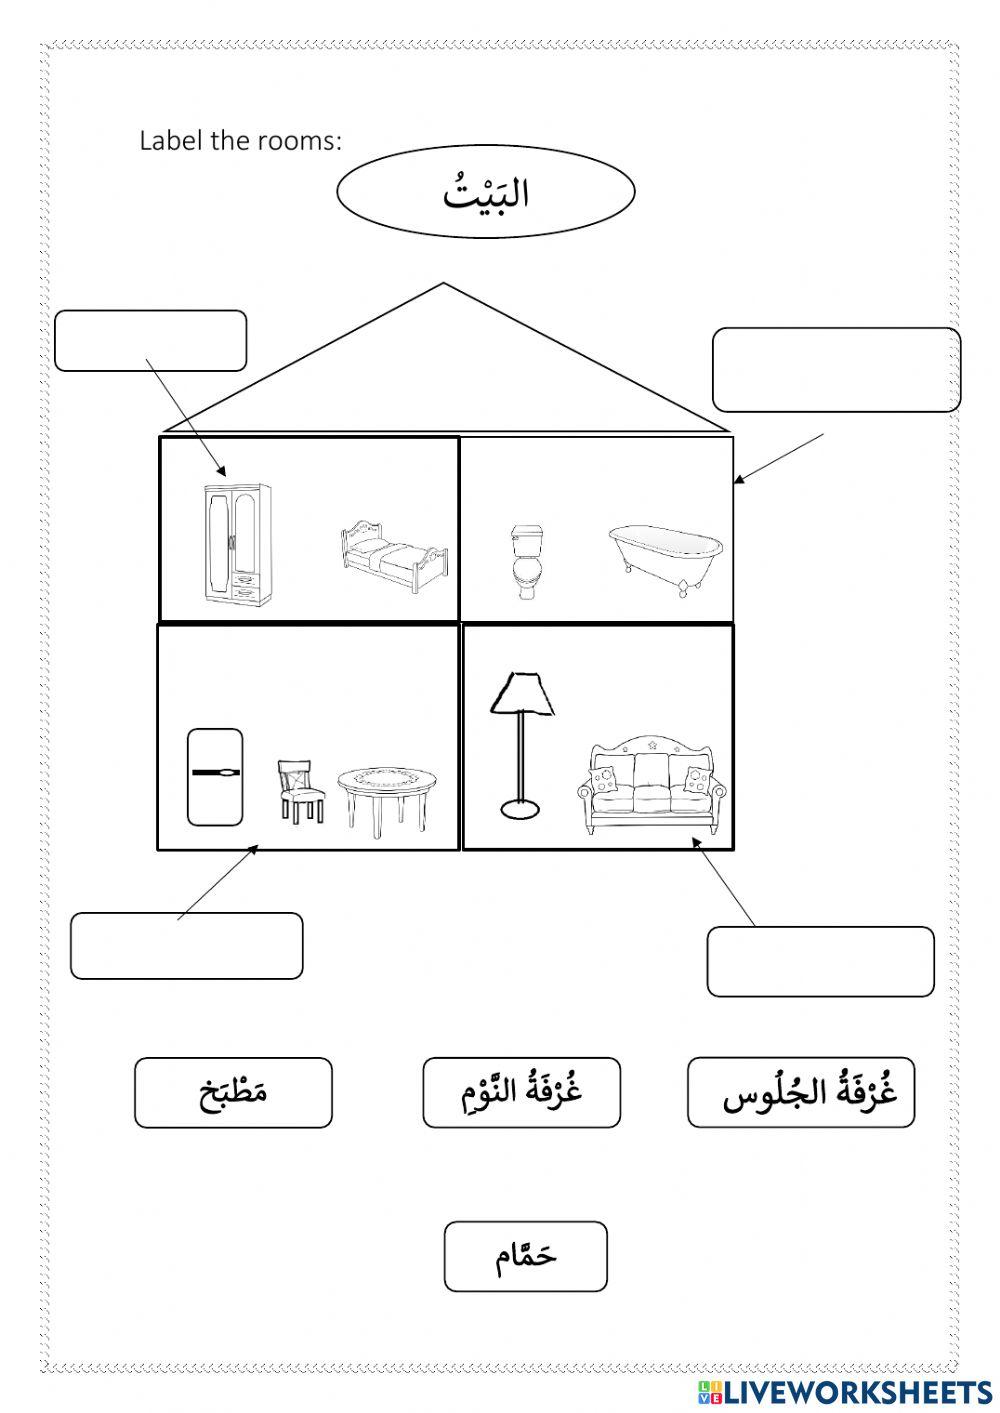 Label the rooms in Arabic